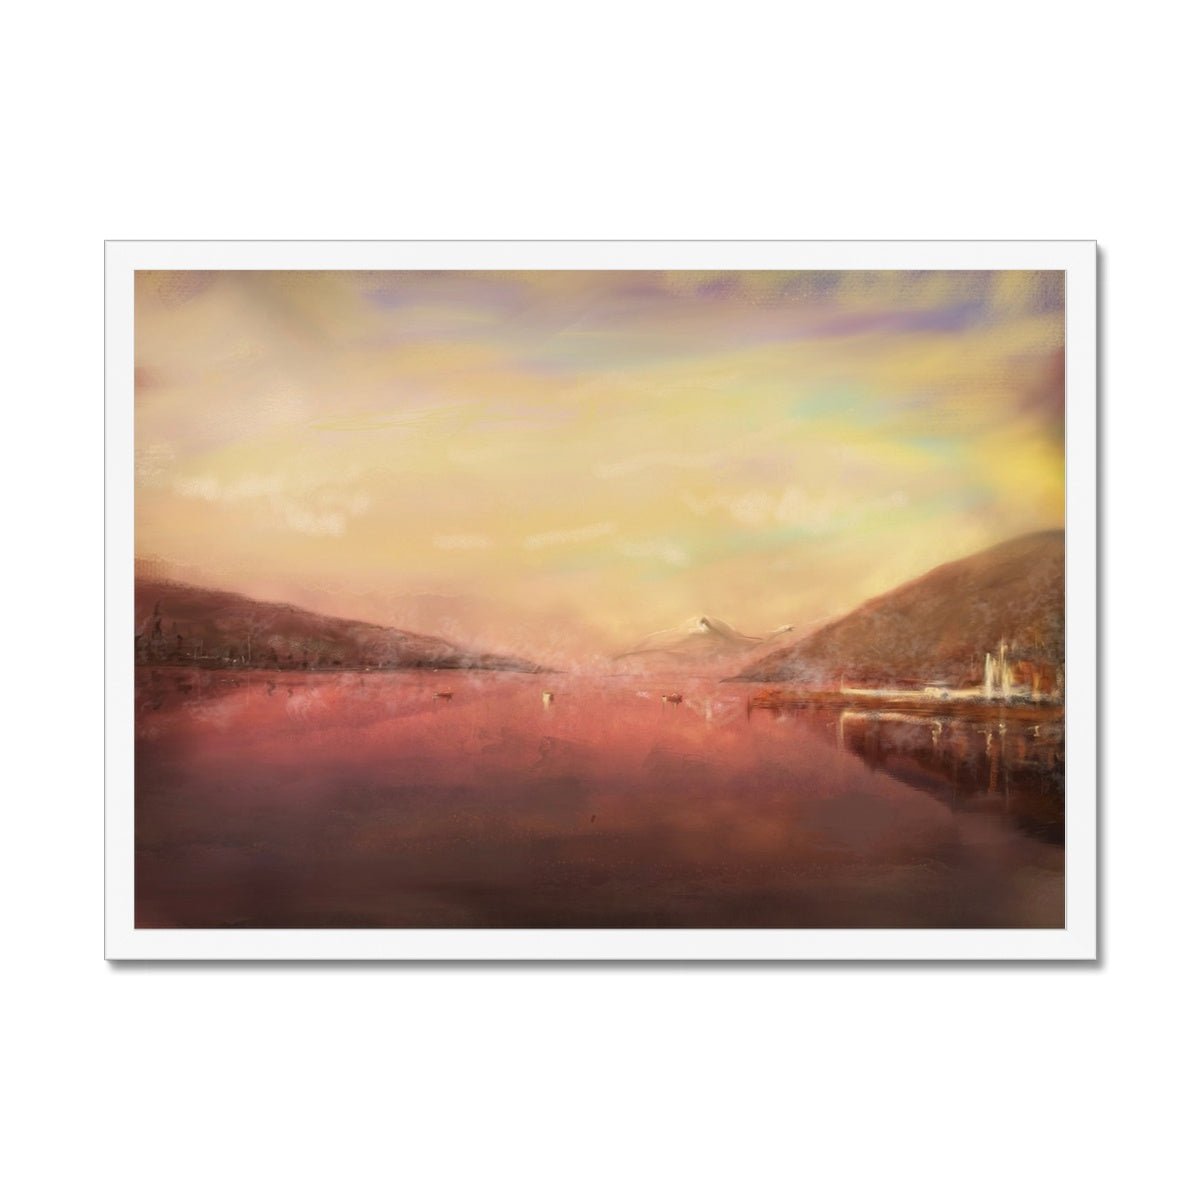 Loch Tay Painting | Framed Prints From Scotland-Framed Prints-Scottish Lochs & Mountains Art Gallery-A2 Landscape-White Frame-Paintings, Prints, Homeware, Art Gifts From Scotland By Scottish Artist Kevin Hunter